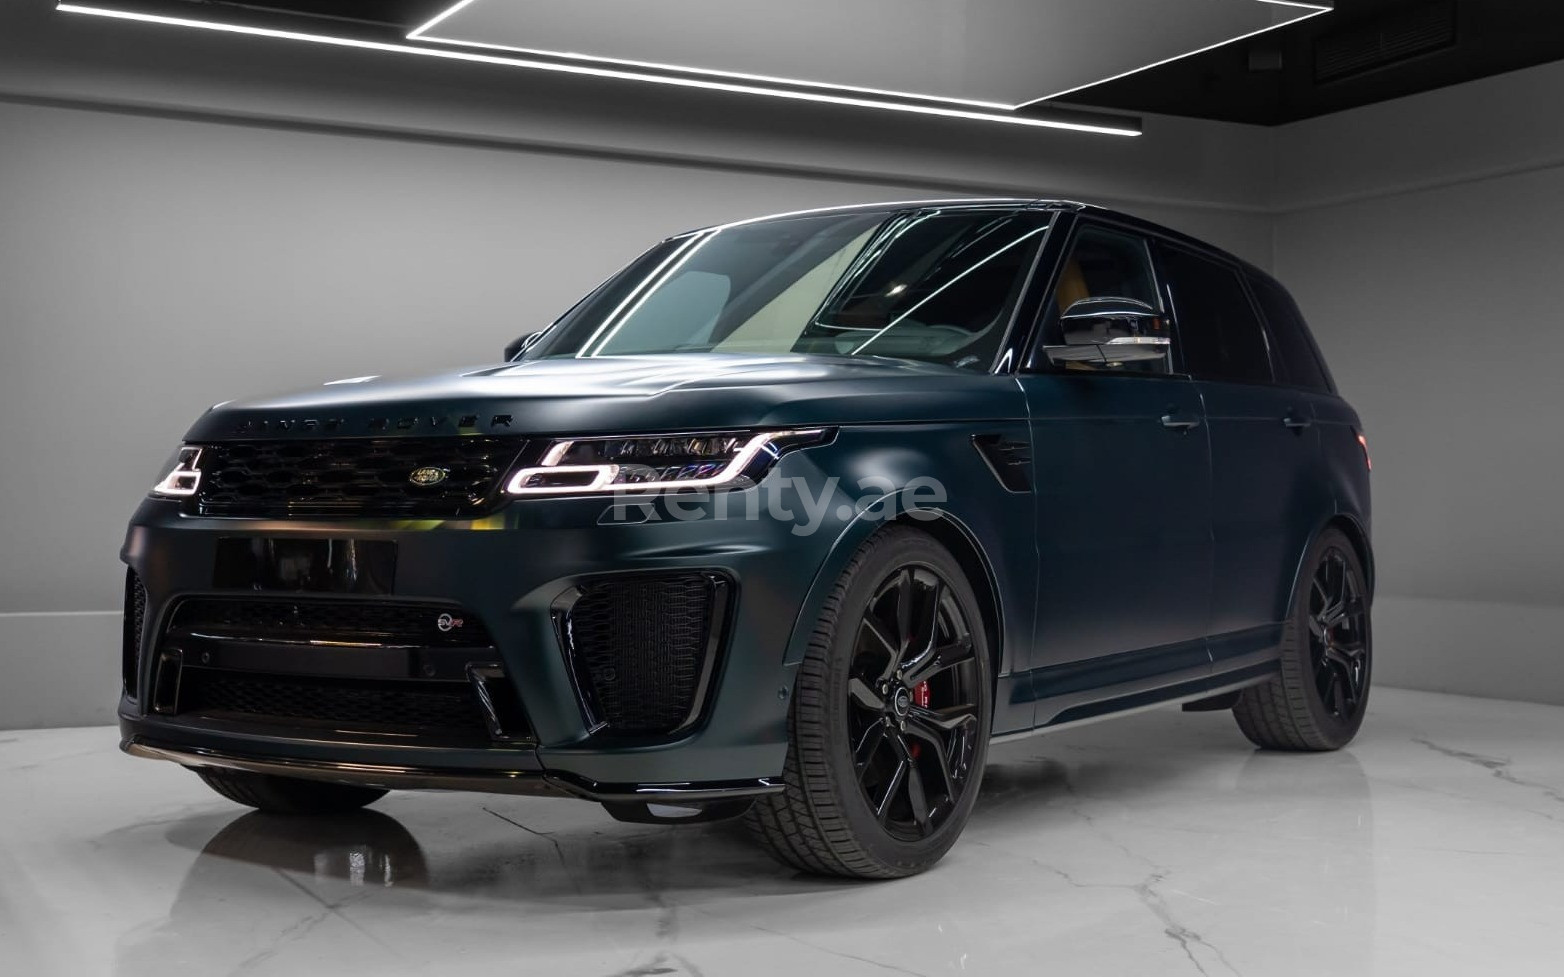 Rent a Range Rover SVR (Green), 2022 ID-05057, in Renty.ae